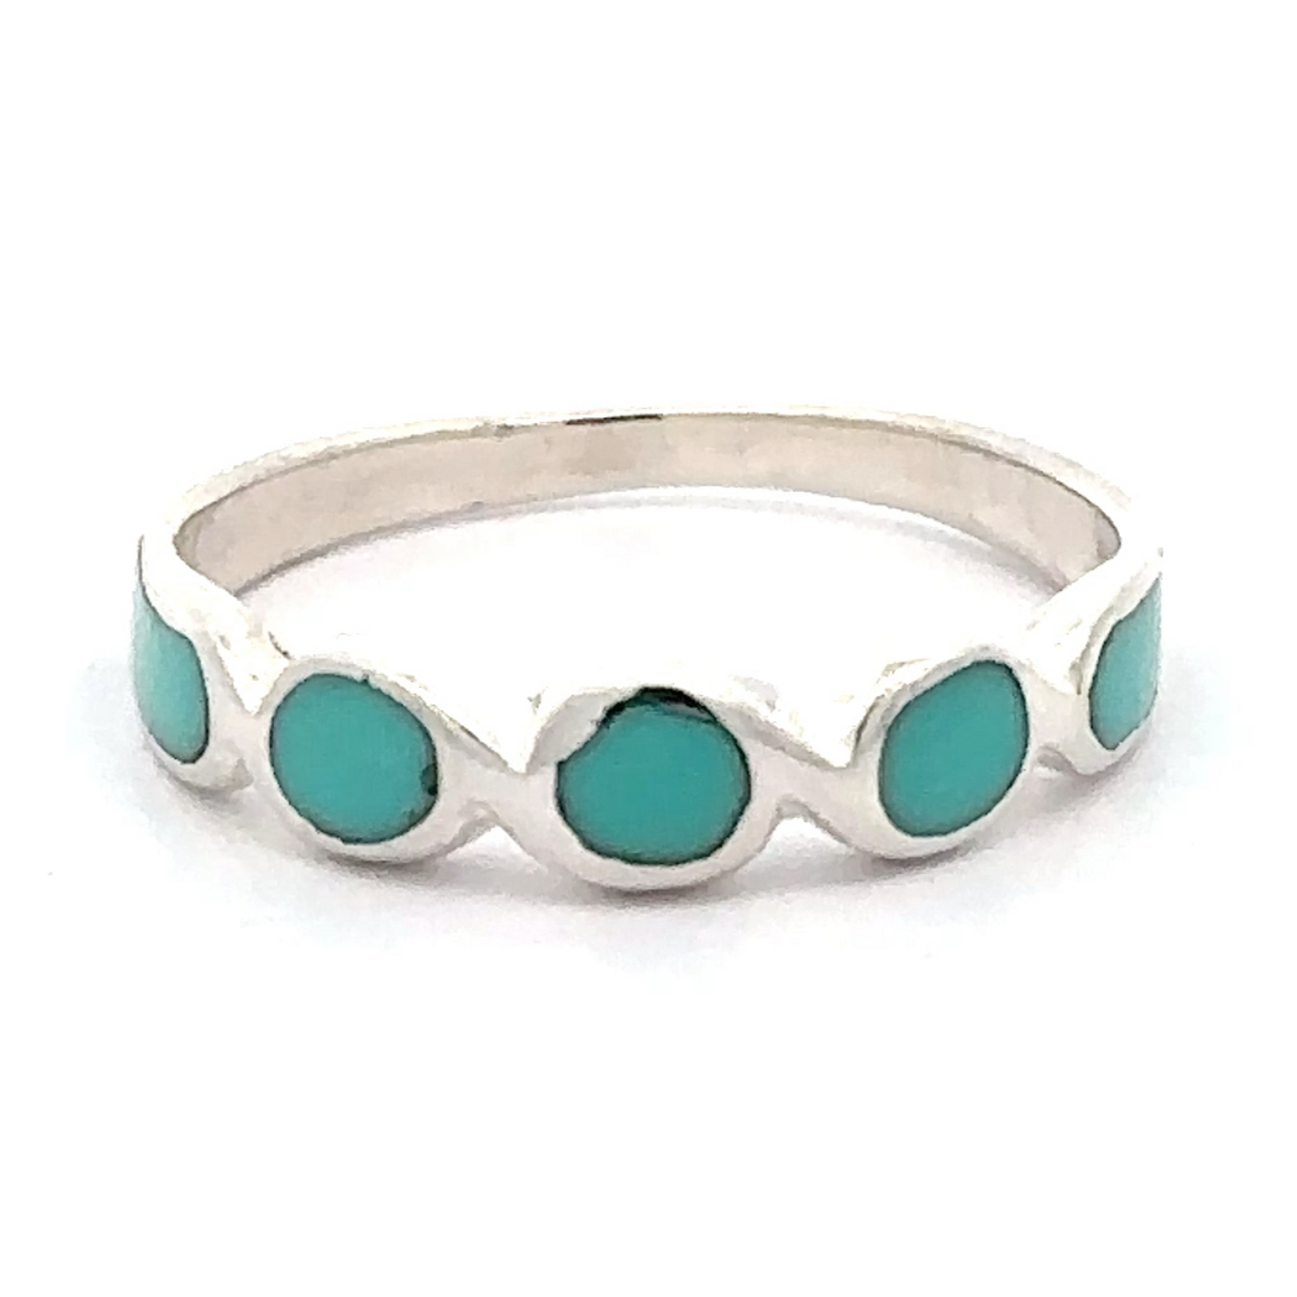 An inlaid turquoise oval crossover patterned ring in sterling silver.